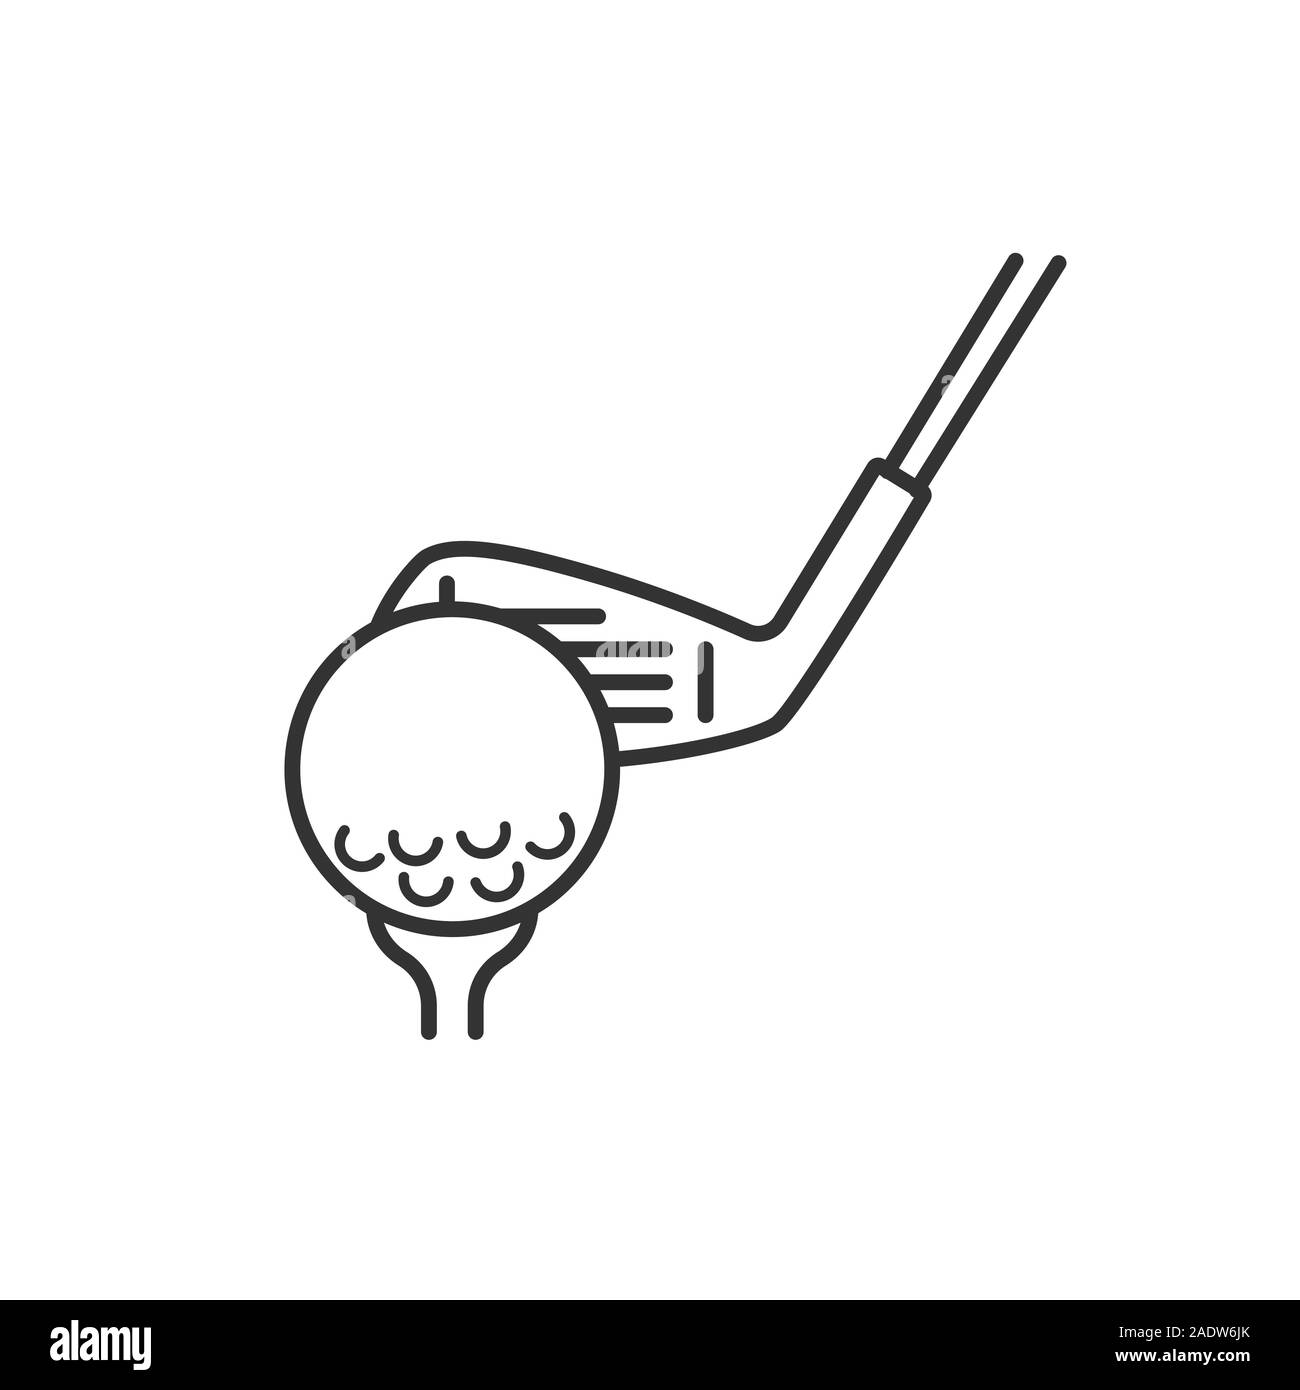 golf clubs drawing